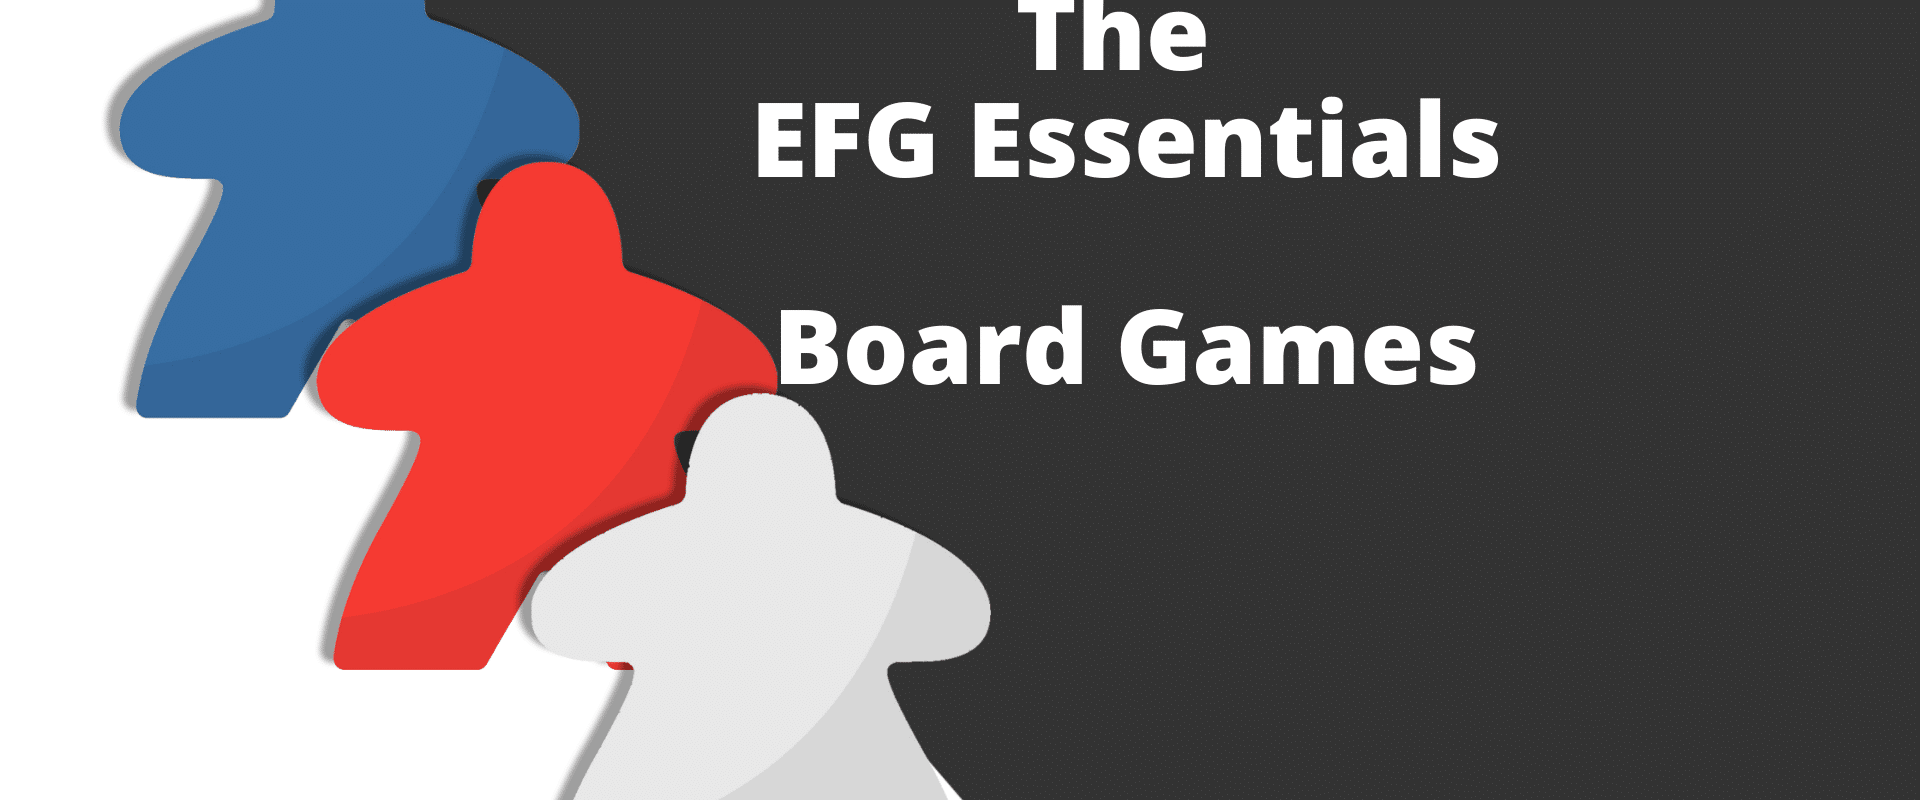 A rectangular image with a stylized image of three meeples on the left and the words The EFG Essentials - Board games on the right